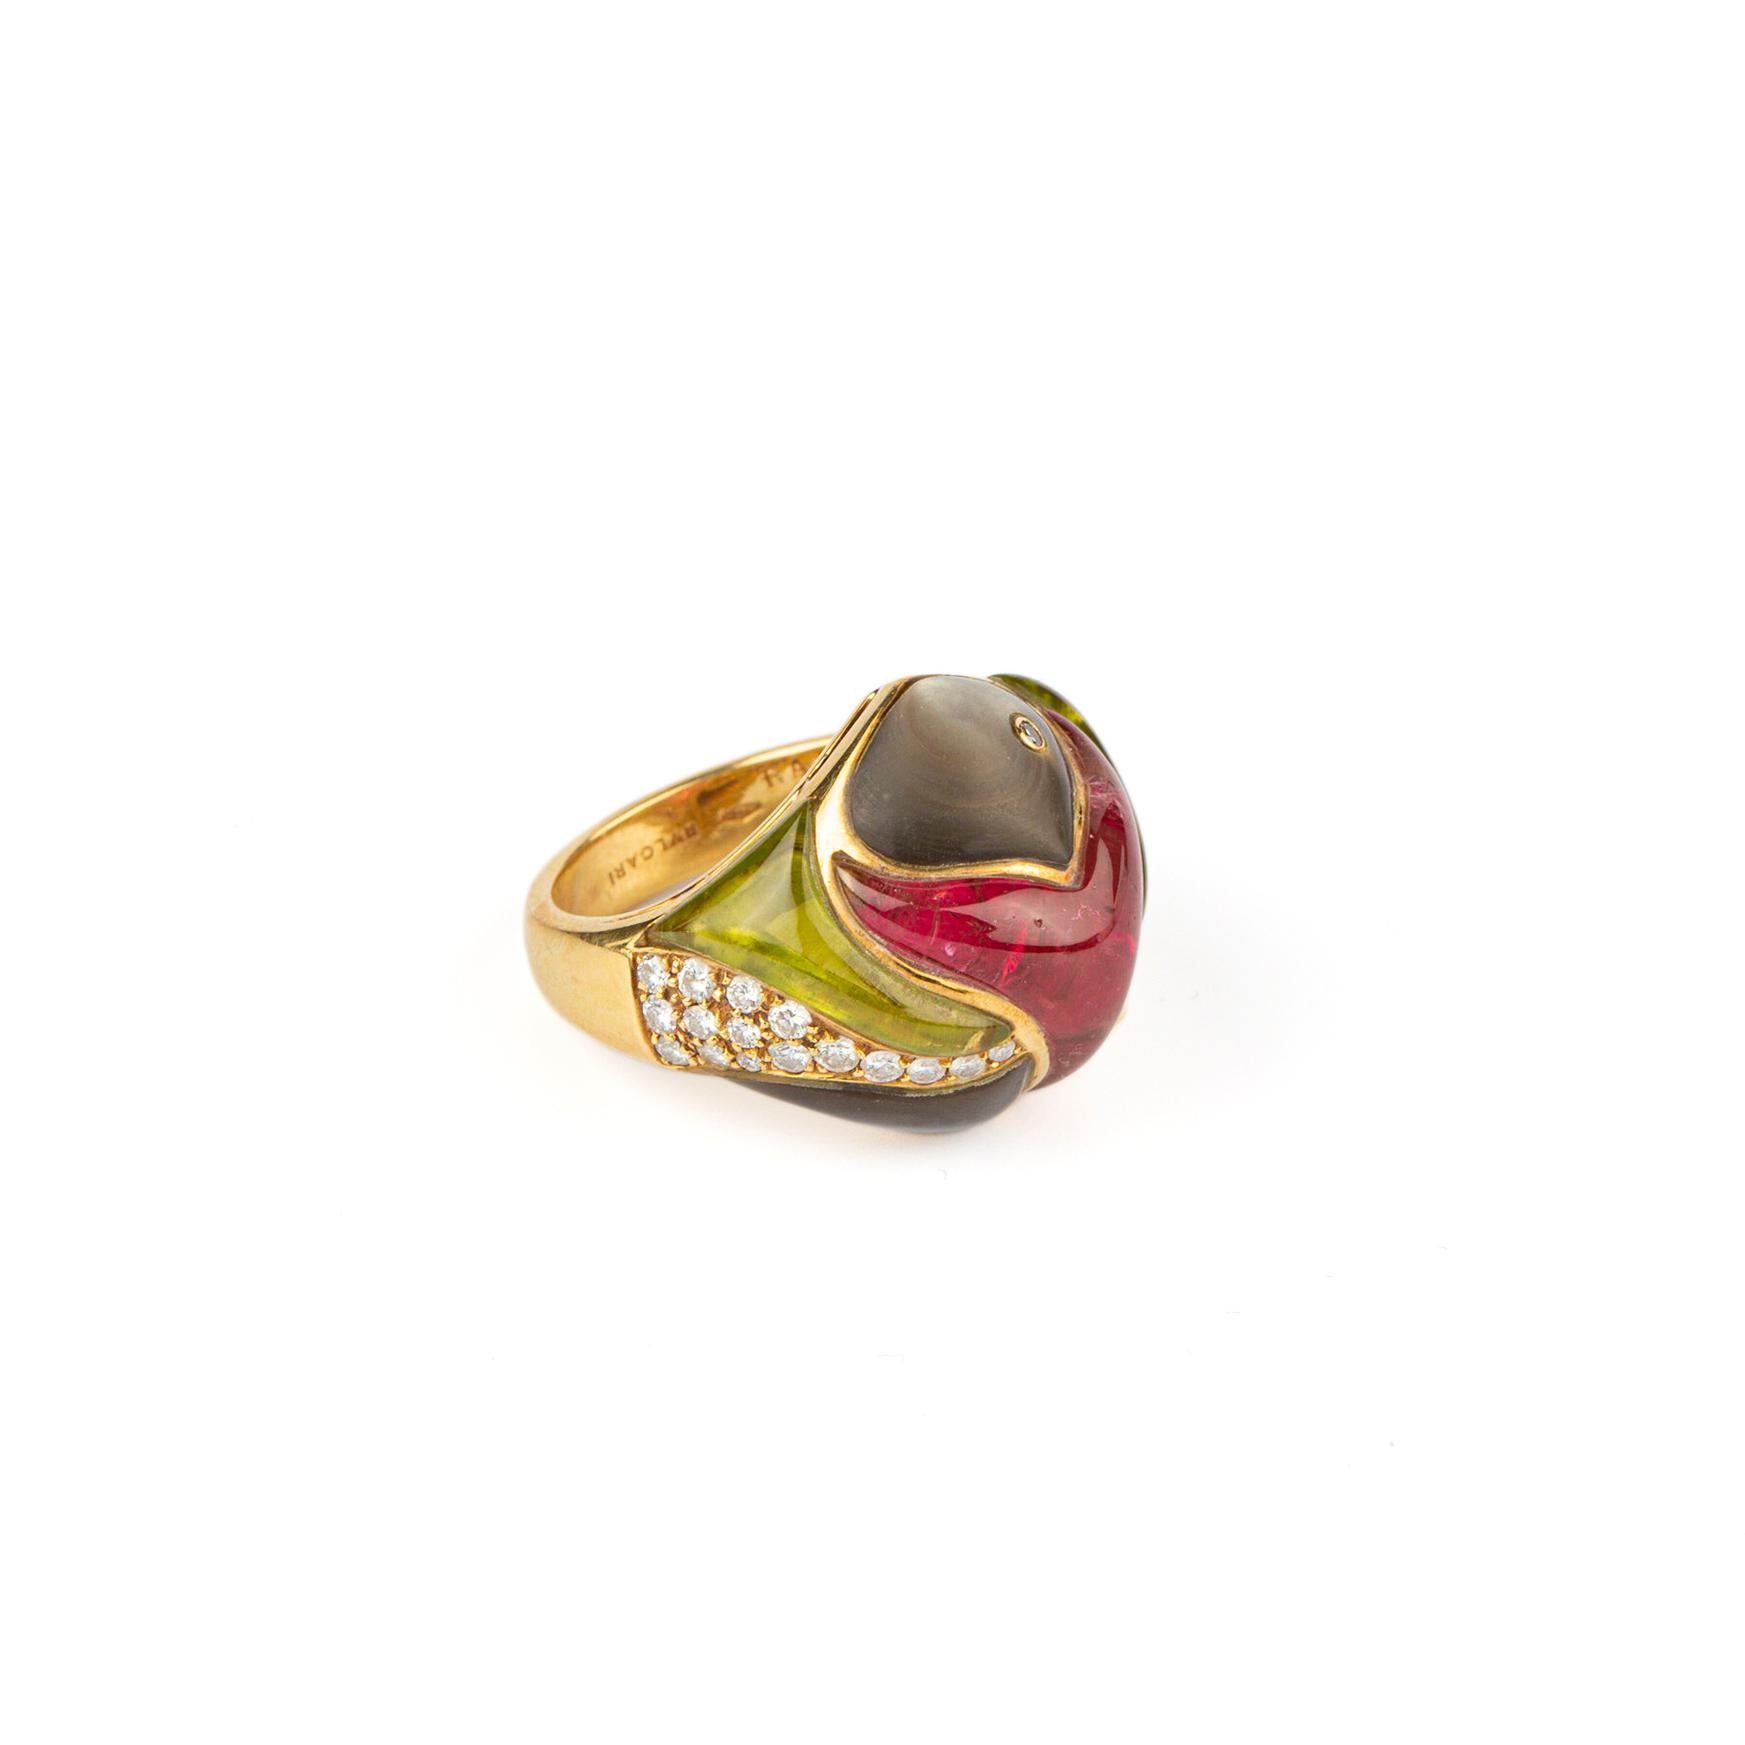 Bulgari rare 18 karat gold, tourmaline, peridot, mother of pearl and pave diamond ring from the Naturalia collection in a stylized fish shape with diamond eye accents. Made in Italy, circa 1980. 